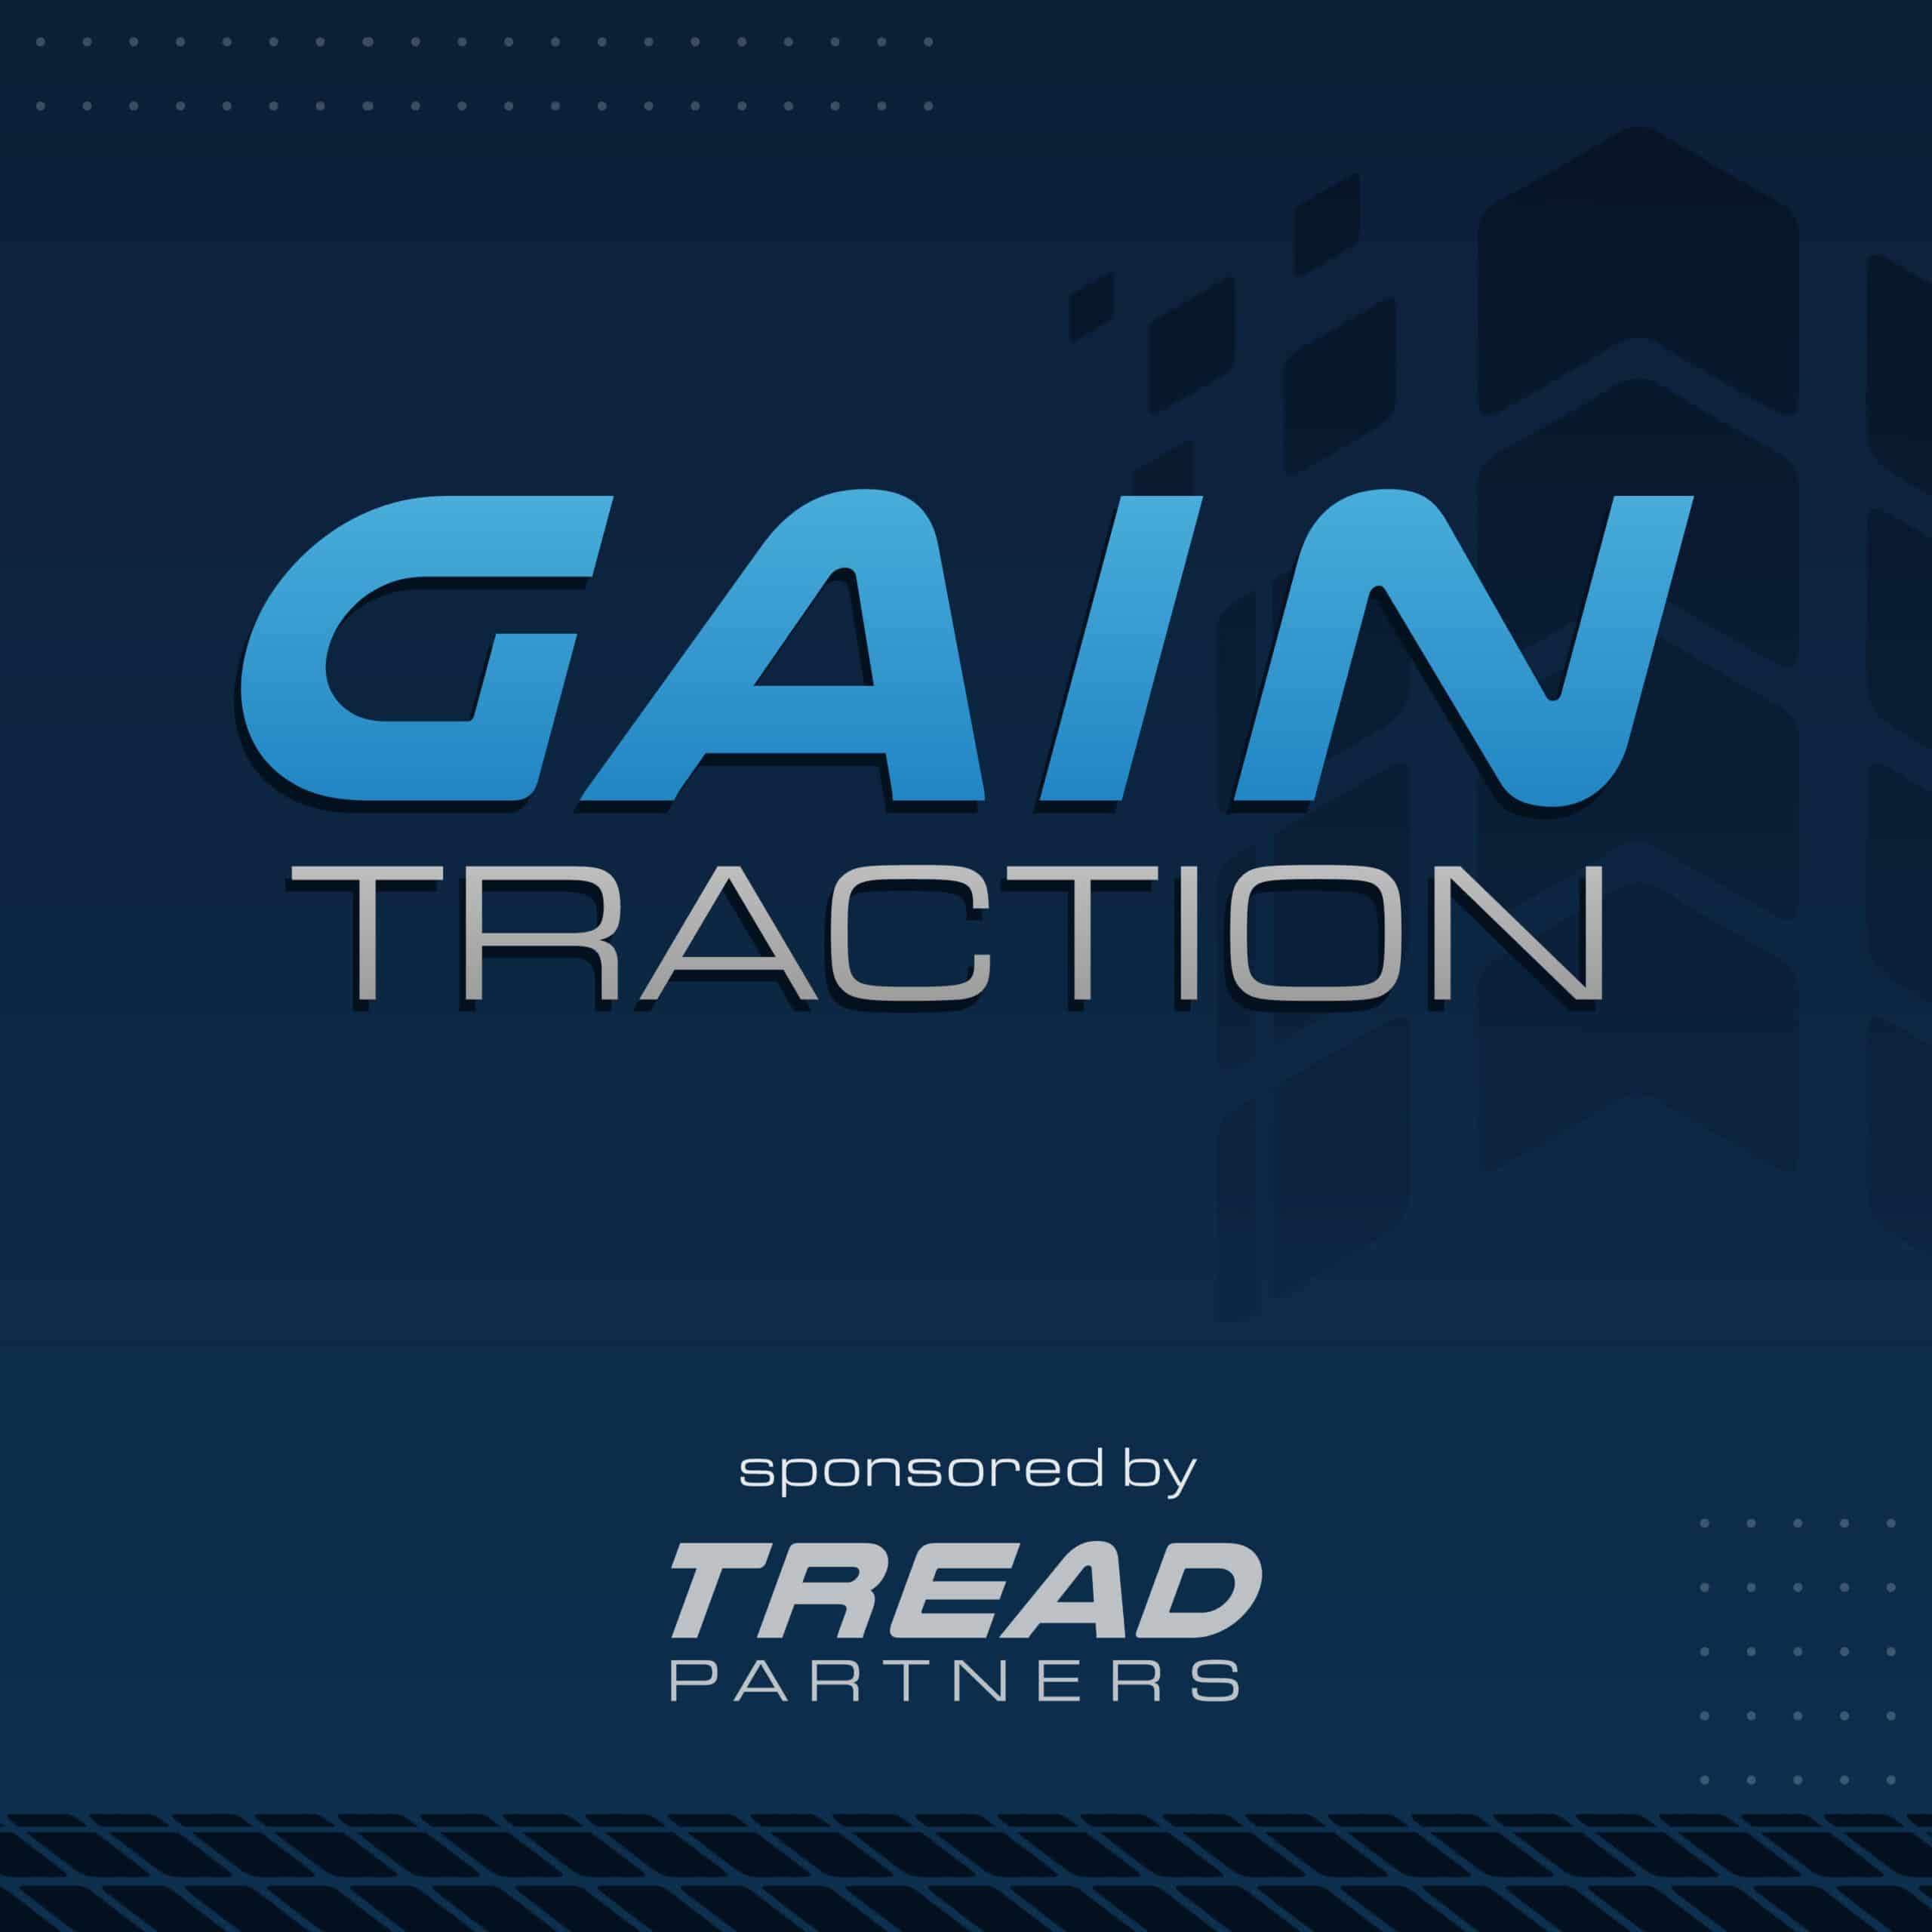 how action gator tire increased leads by over 276.45%